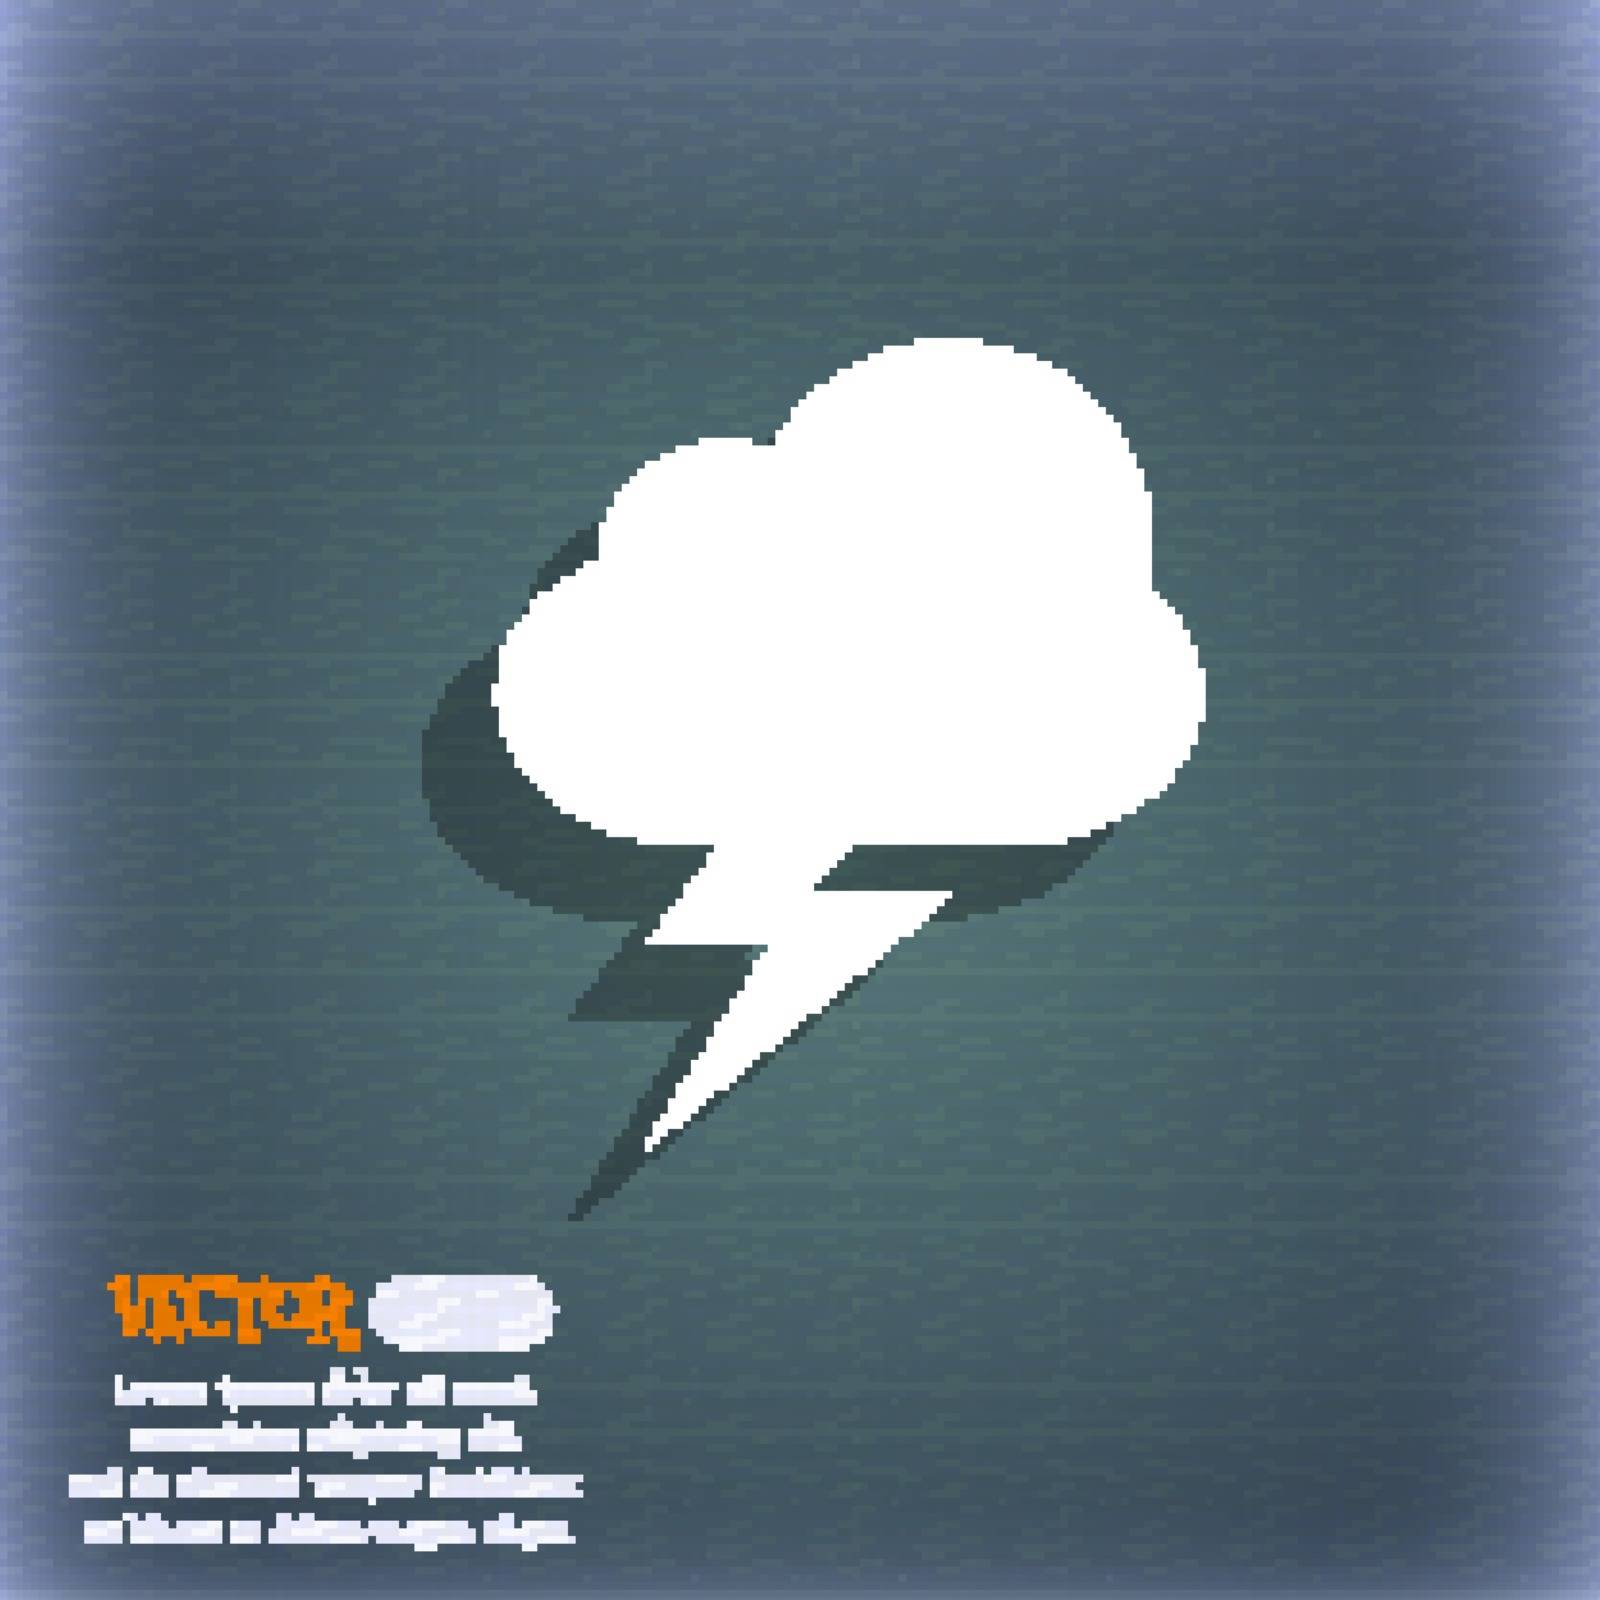 storm  icon symbol on the blue-green abstract background with shadow and space for your text. Vector illustration